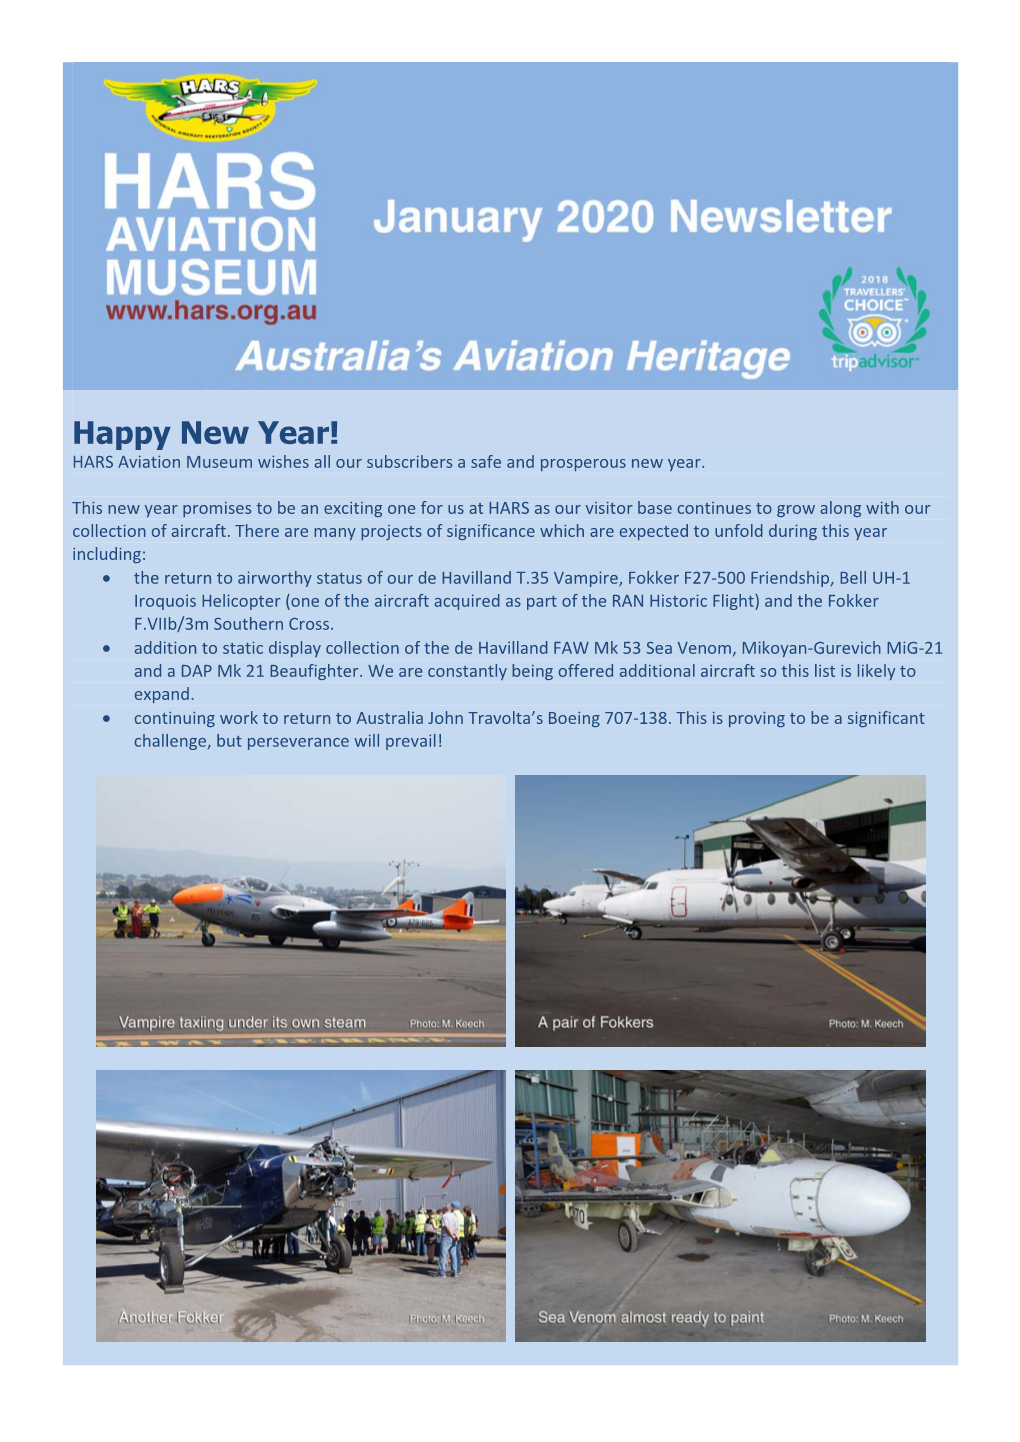 Happy New Year! HARS Aviation Museum Wishes All Our Subscribers a Safe and Prosperous New Year